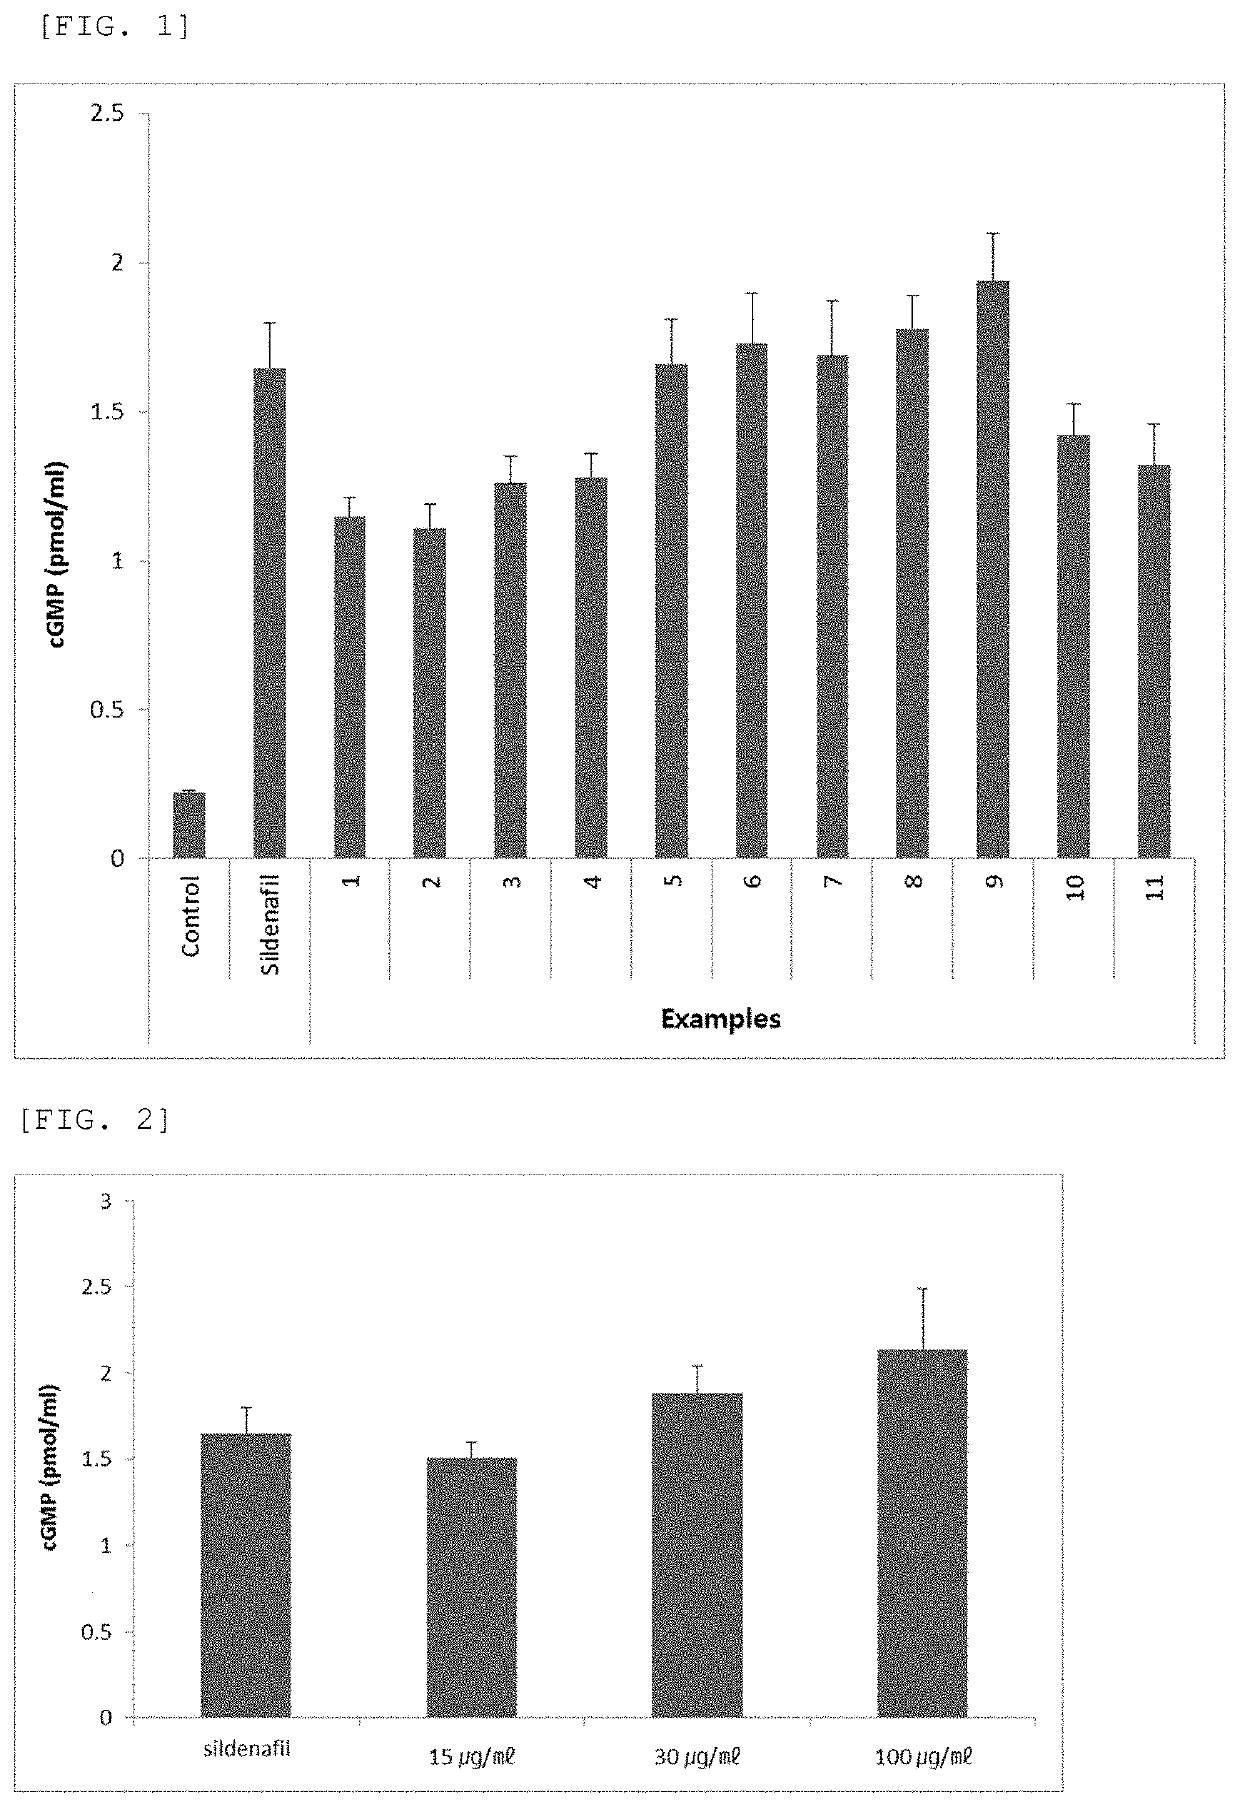 Pharmaceutical composition for prevention and treatment of prostatic hyperplasia and erectile dysfunction caused by andropause comprising extract of lespedeza cuneata and trigonellae semen